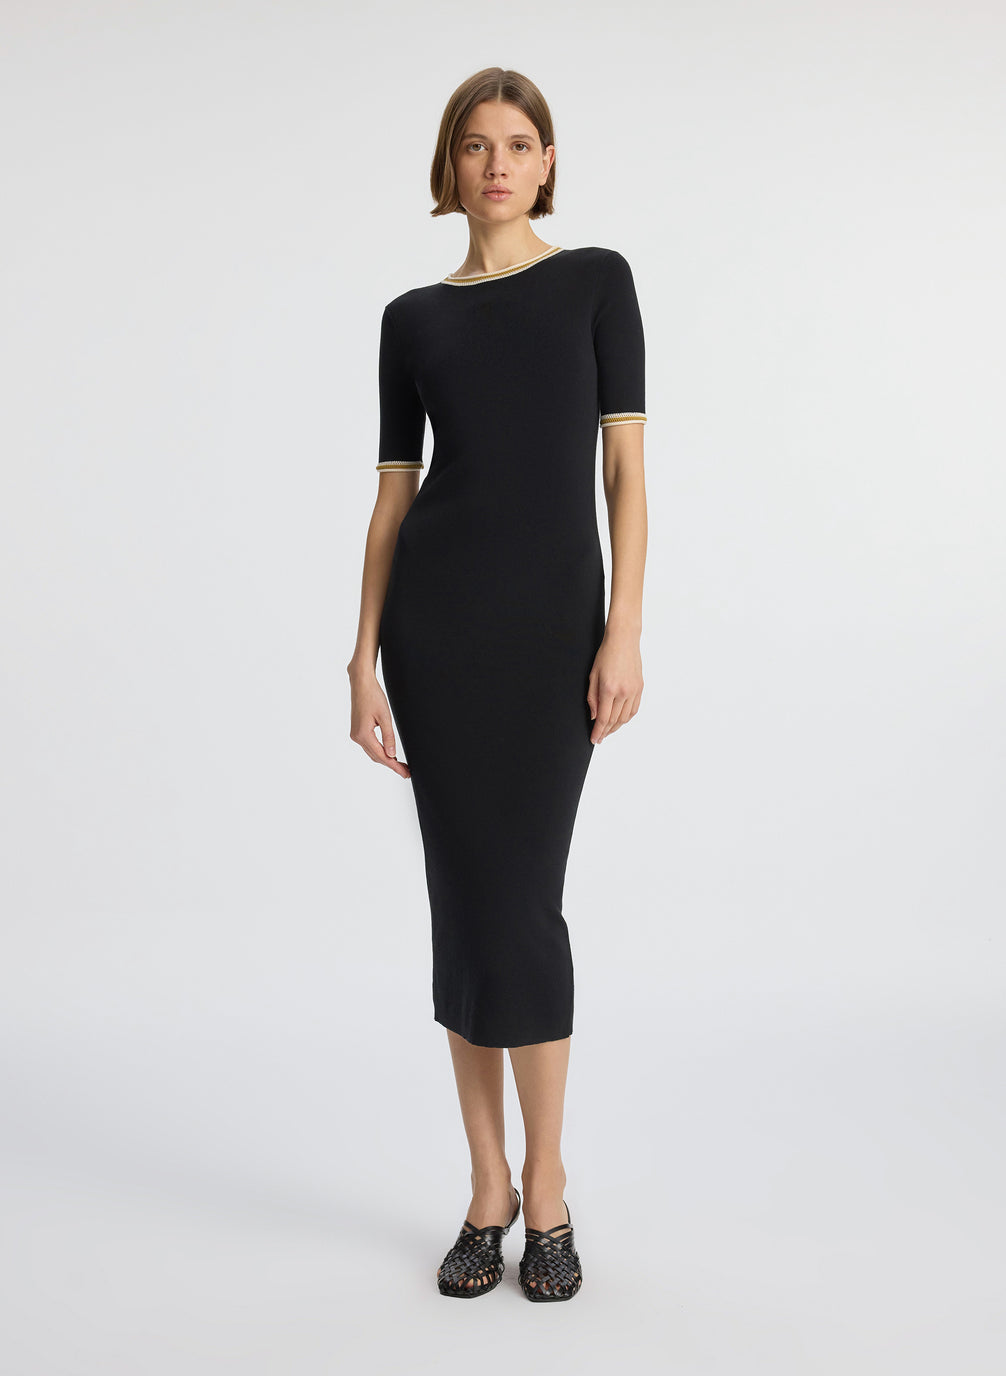 front view of woman wearing black short sleeve midi dress